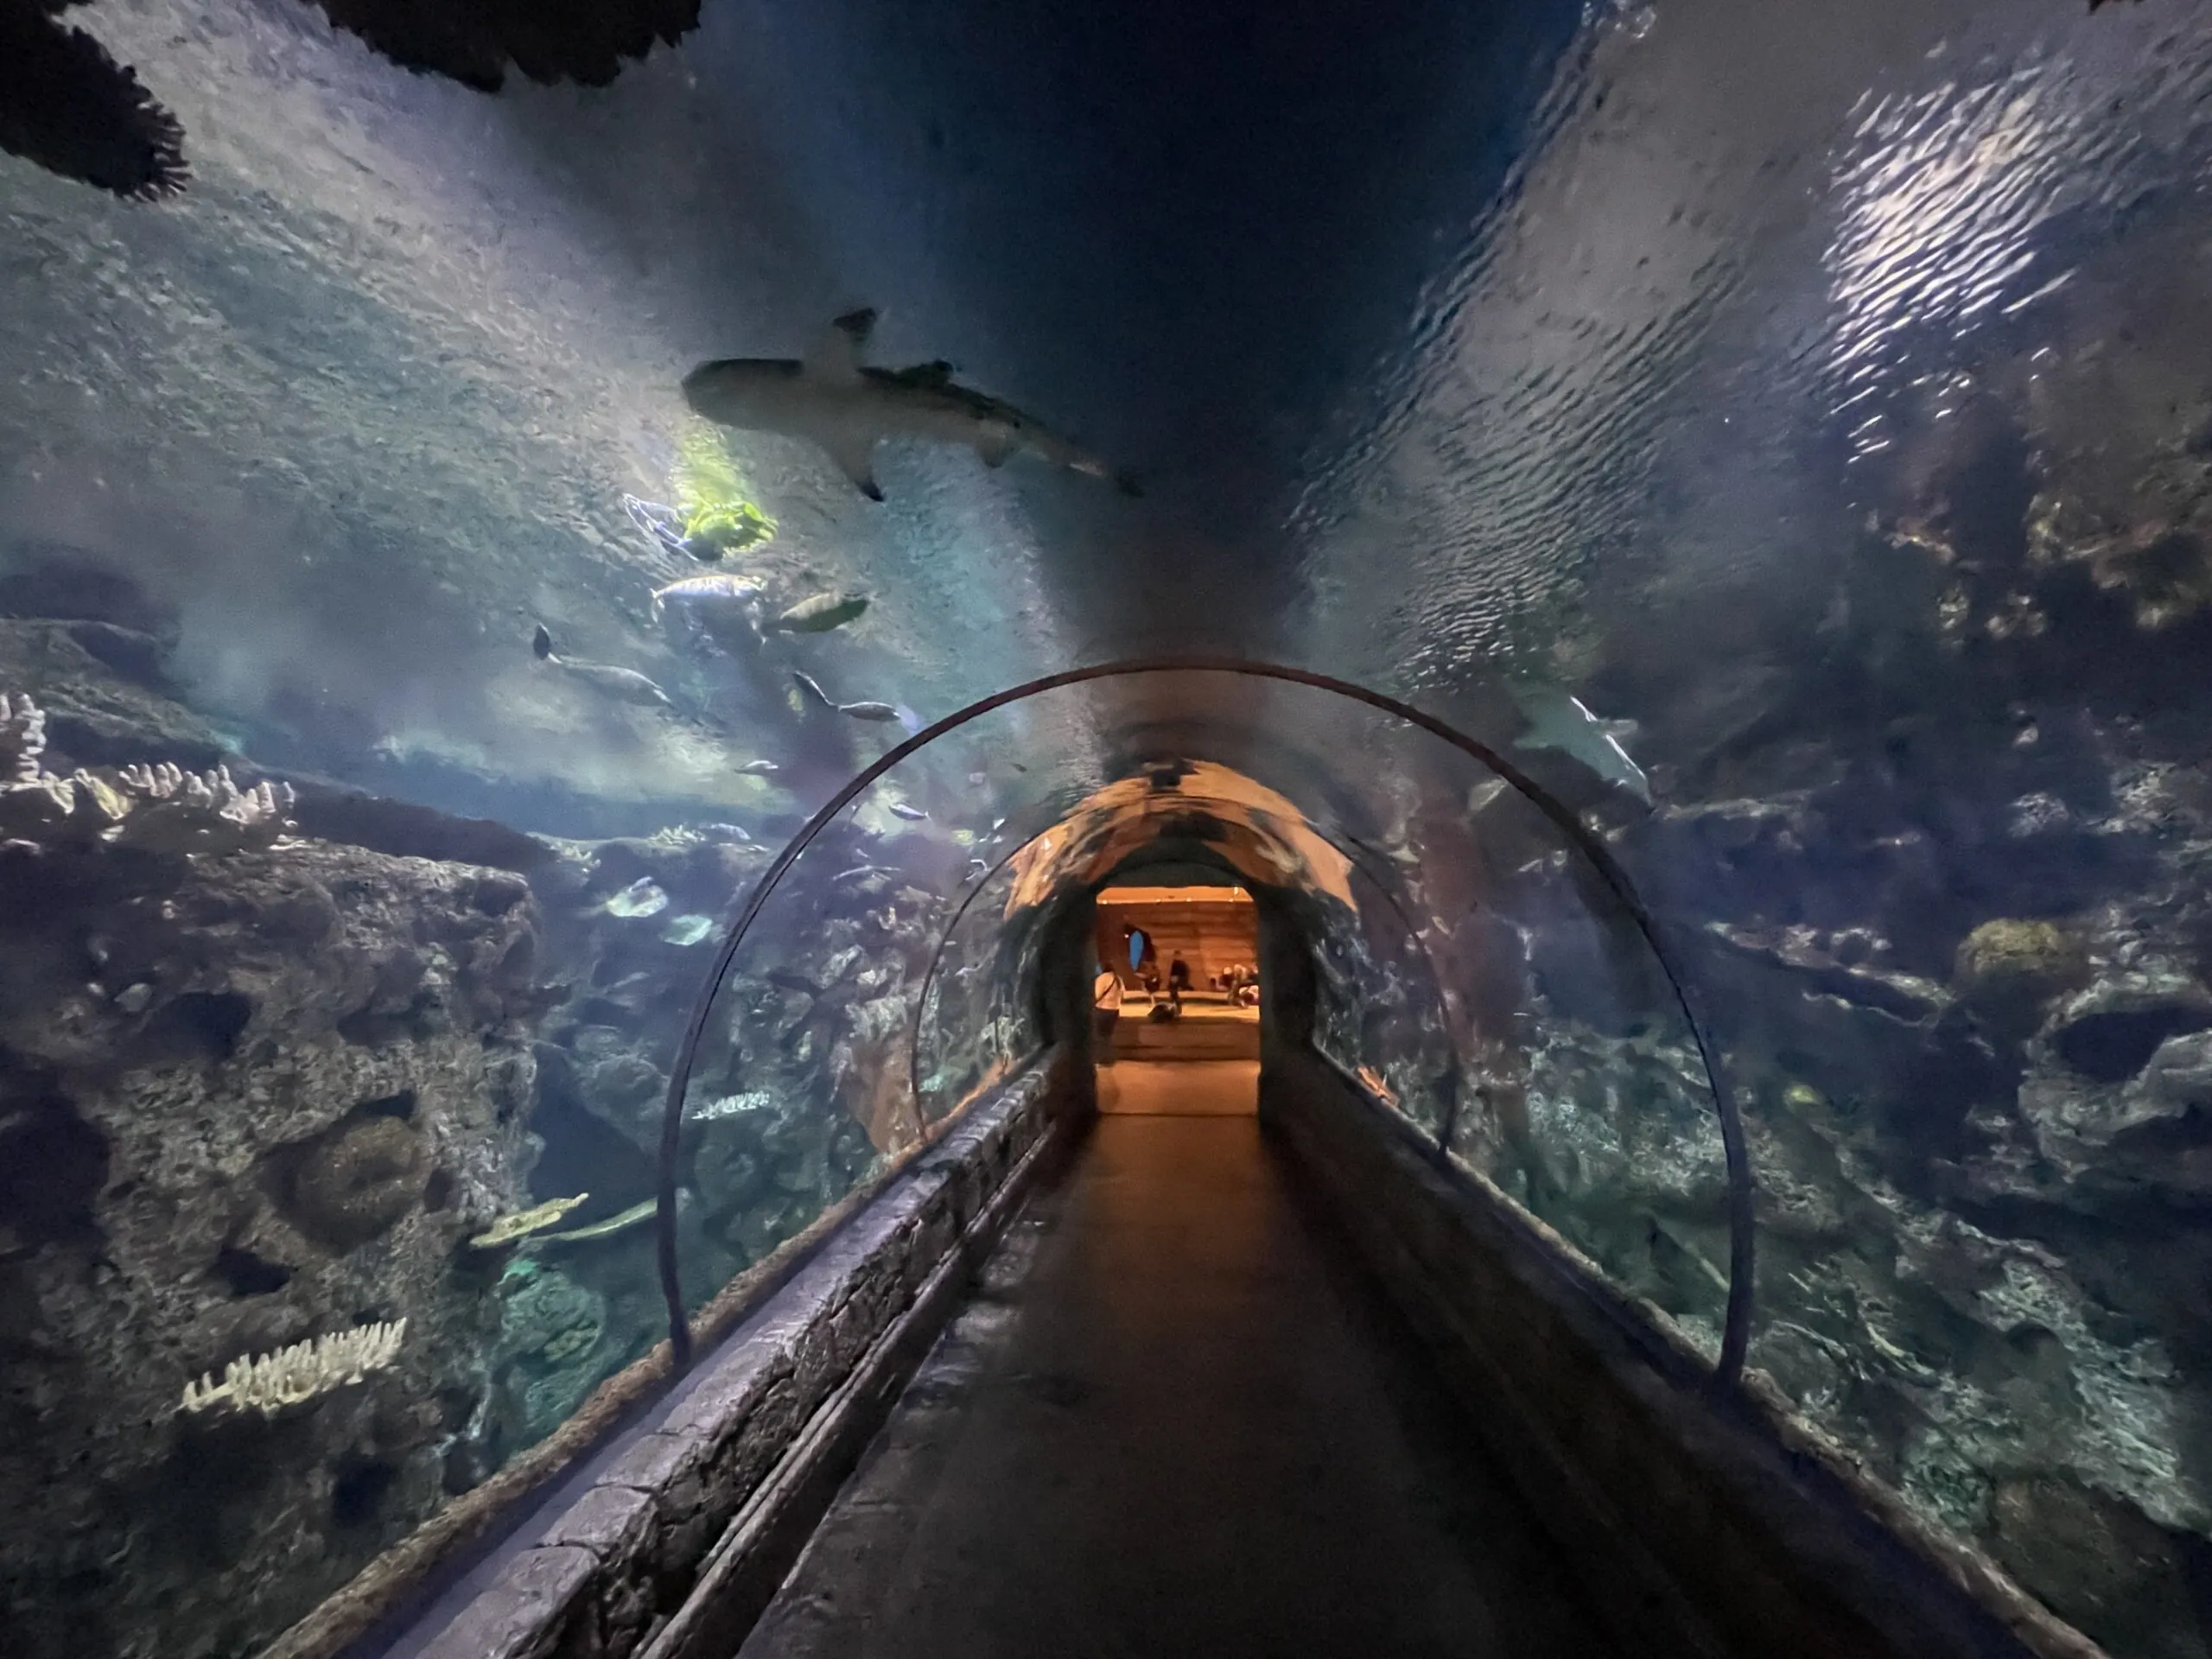 The Longer of two glass tunnels that are underwater at the Aquarium.